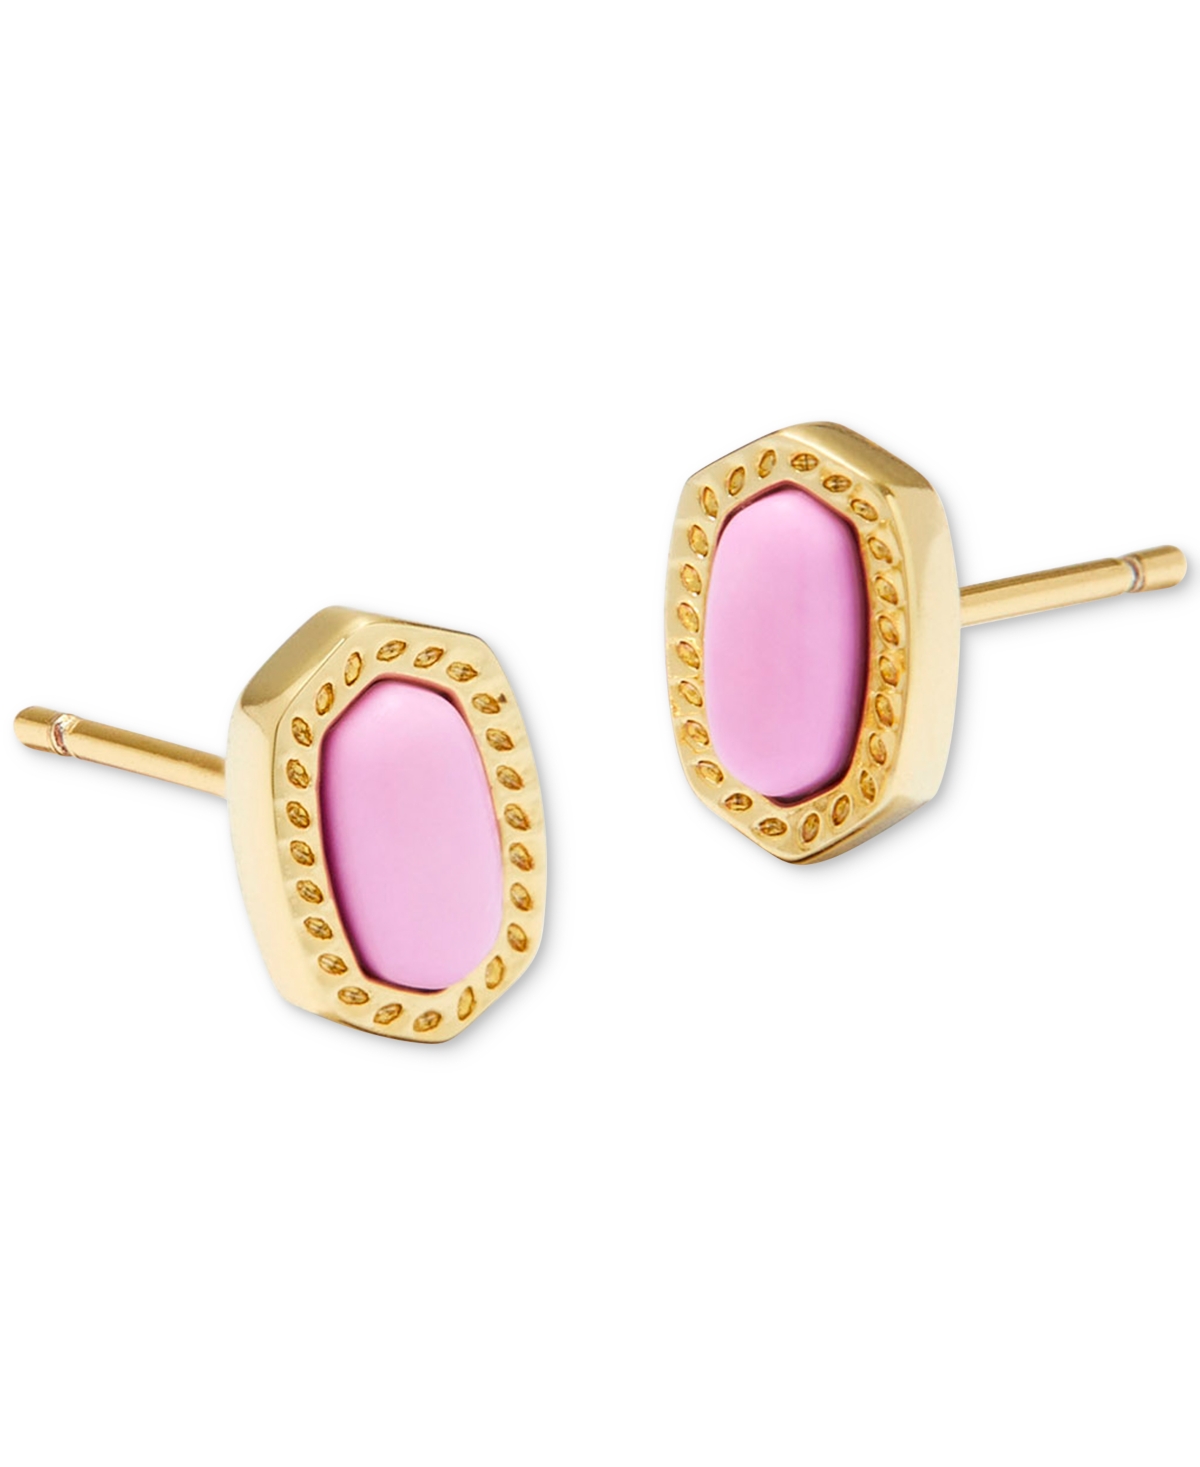 14k Gold-Plated Oval Stone Stud Earrings - Pink Opalite Crystal